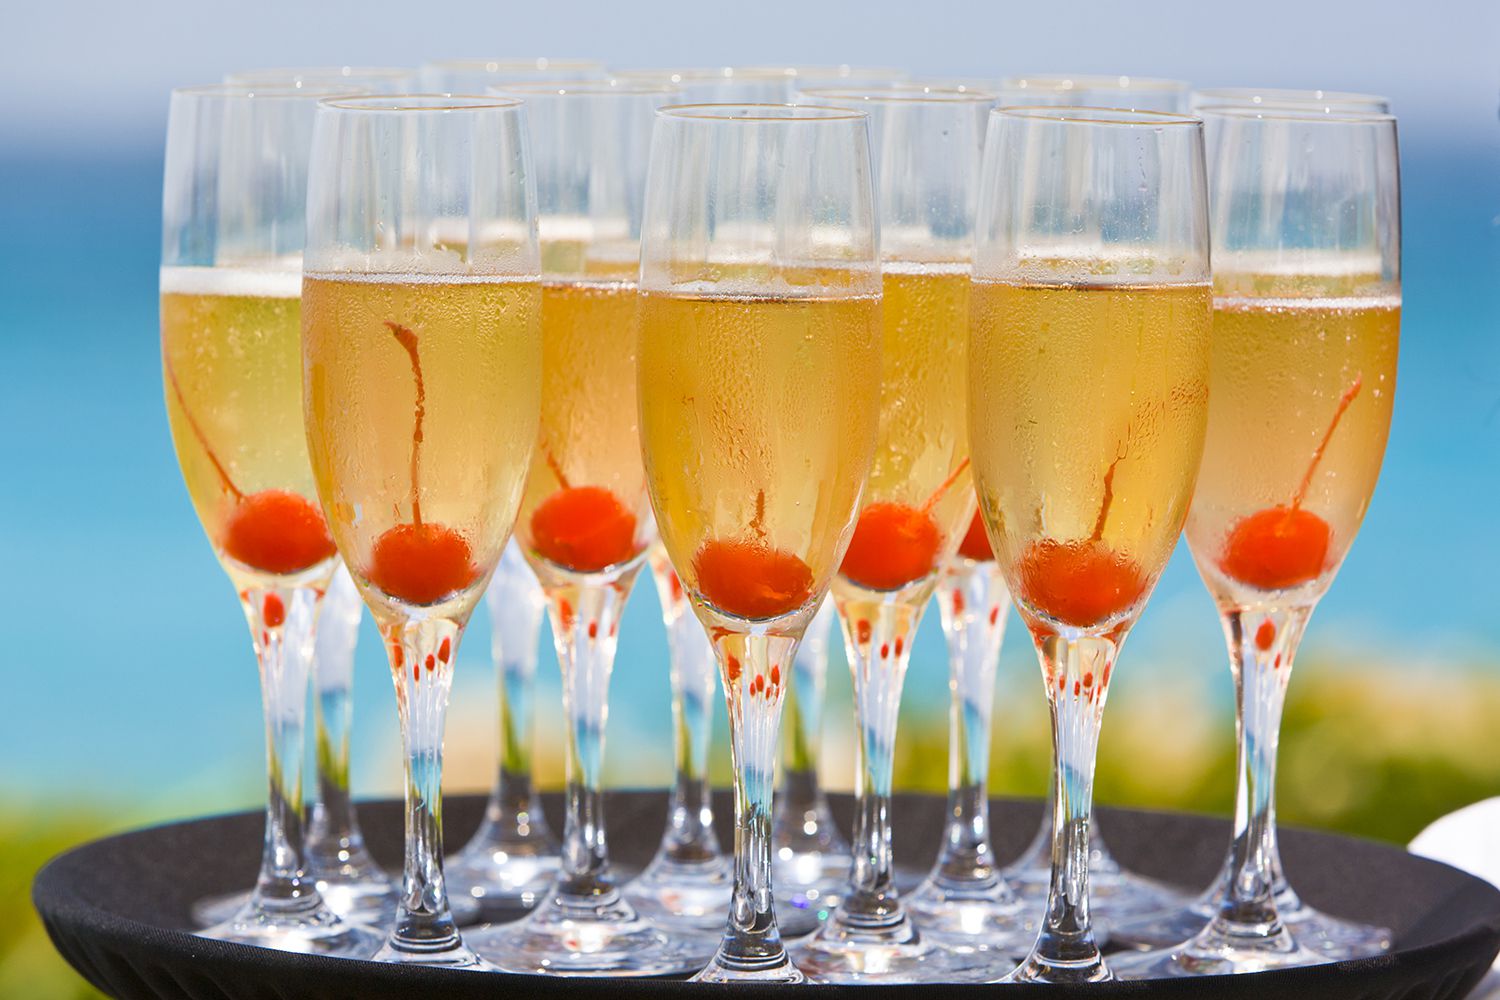 10 Fantastic Champagne Cocktails to Impress Anyone